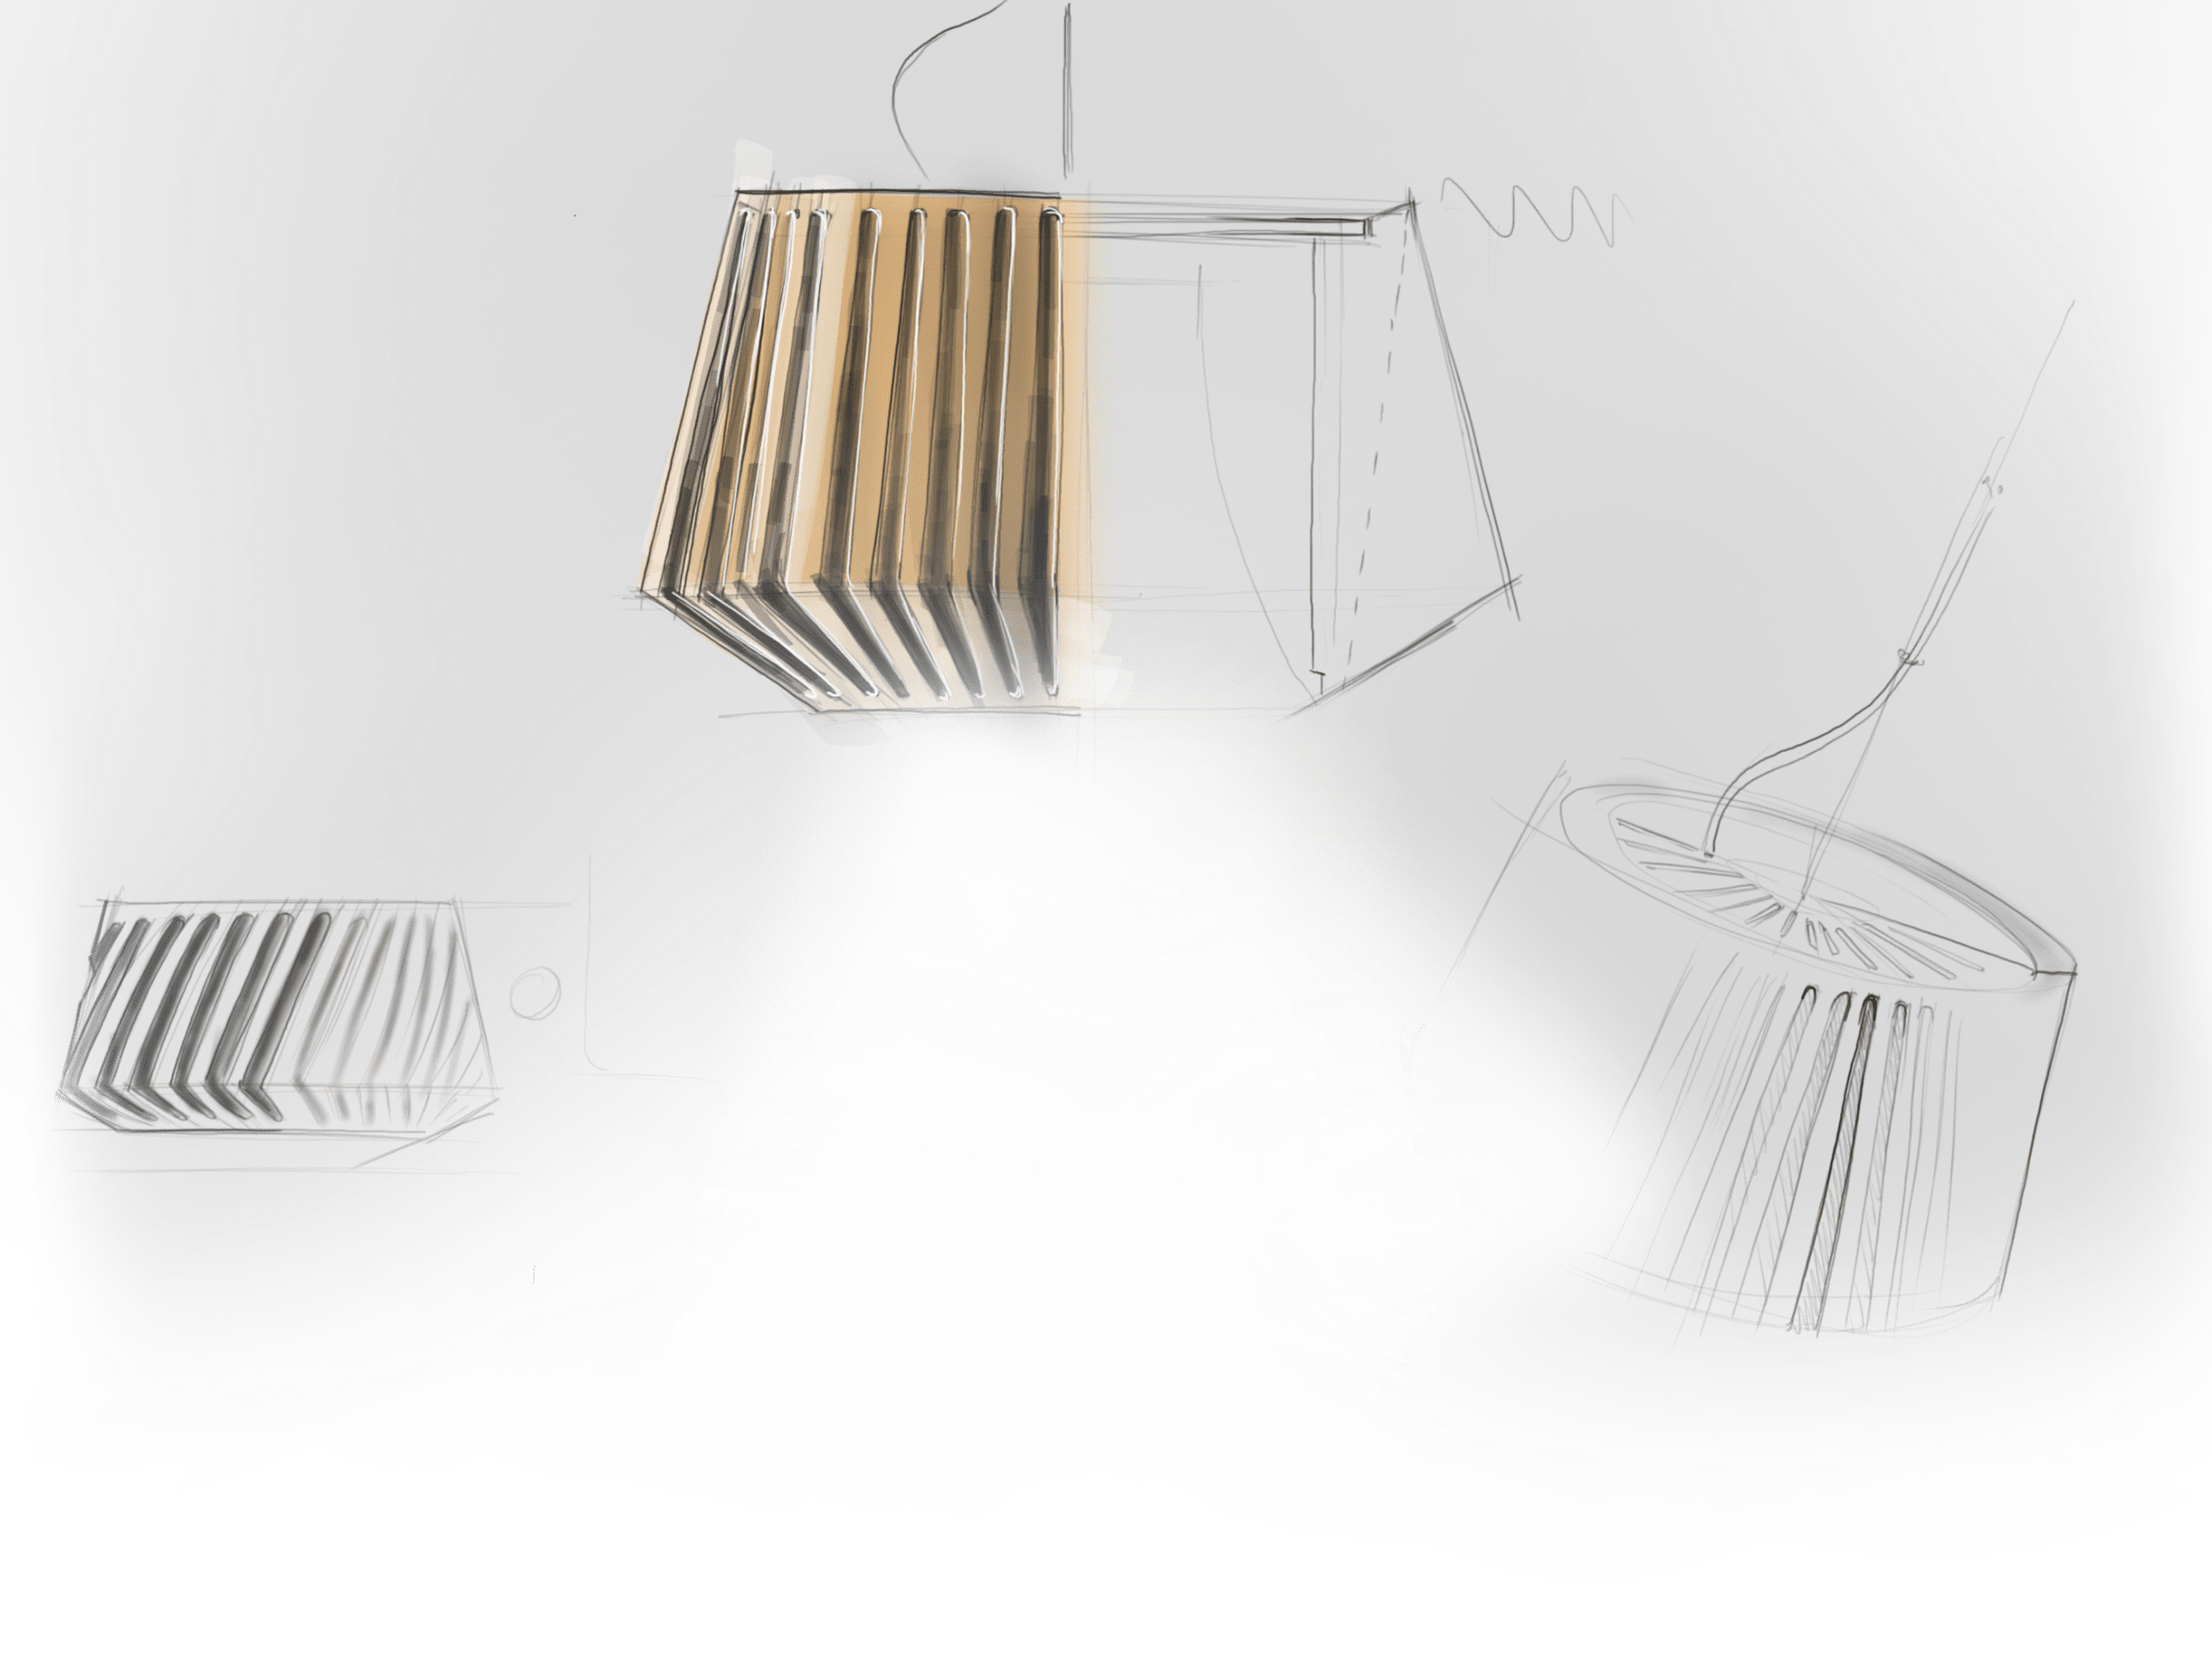 Sketch of the Pohlcon SystemPlus pendant lamp with lampshade made of cooling fins and technical cross section